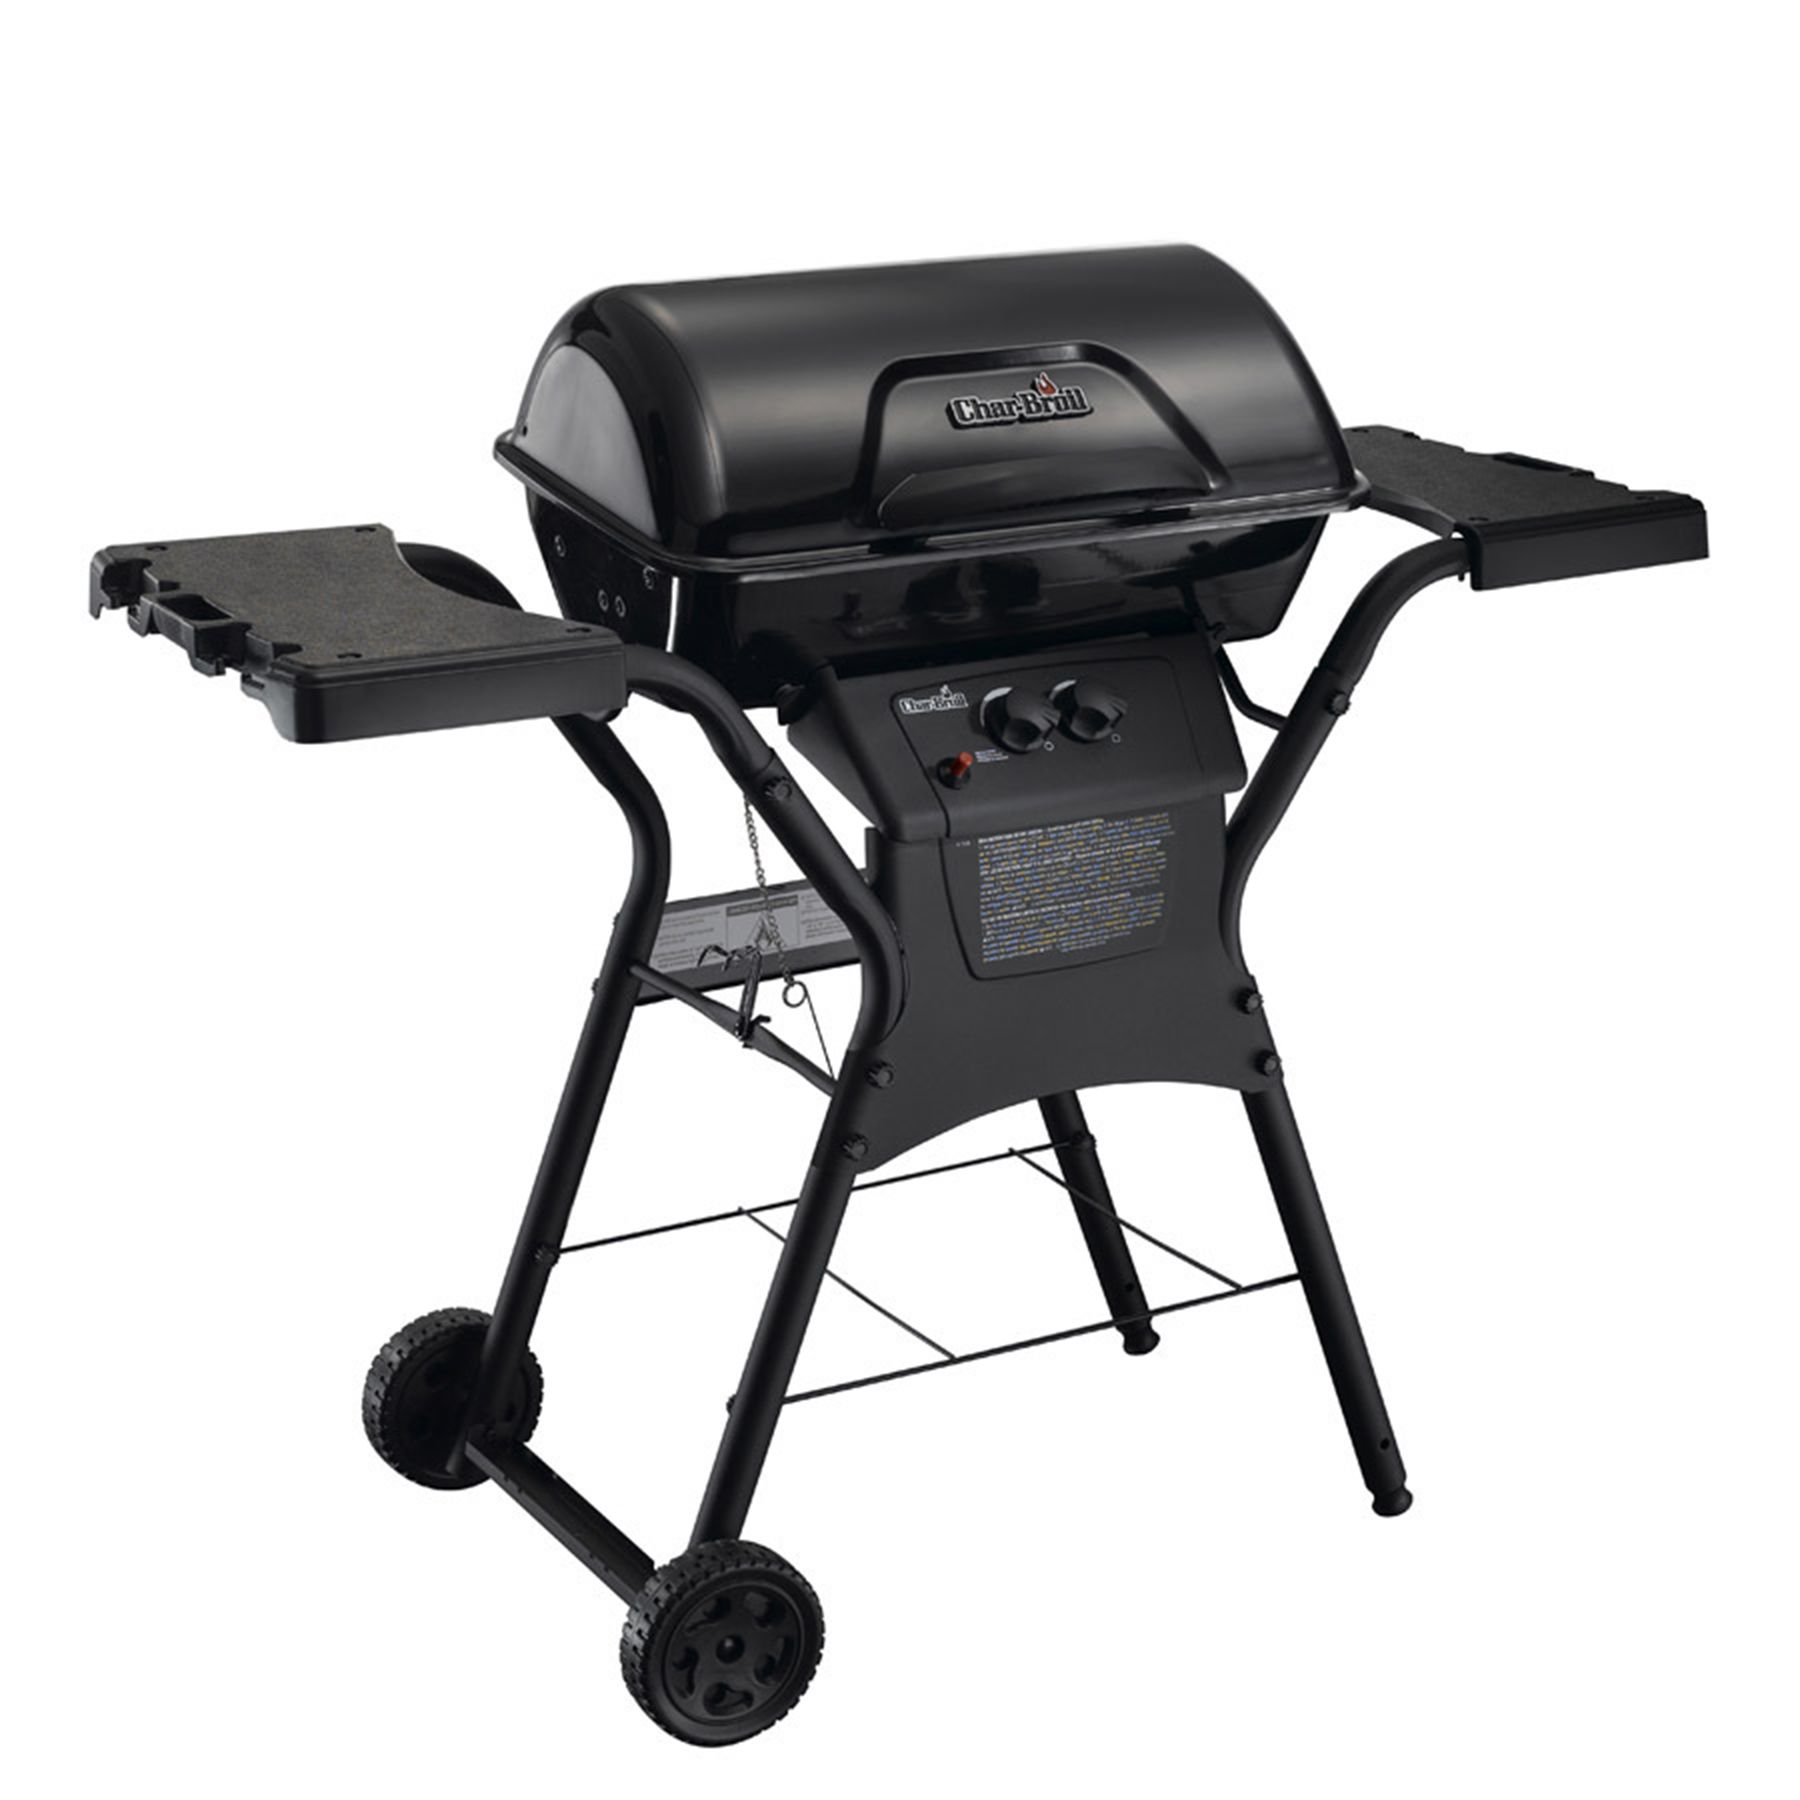 The 7 Best Low Cost Gas Grills to Buy in 2018